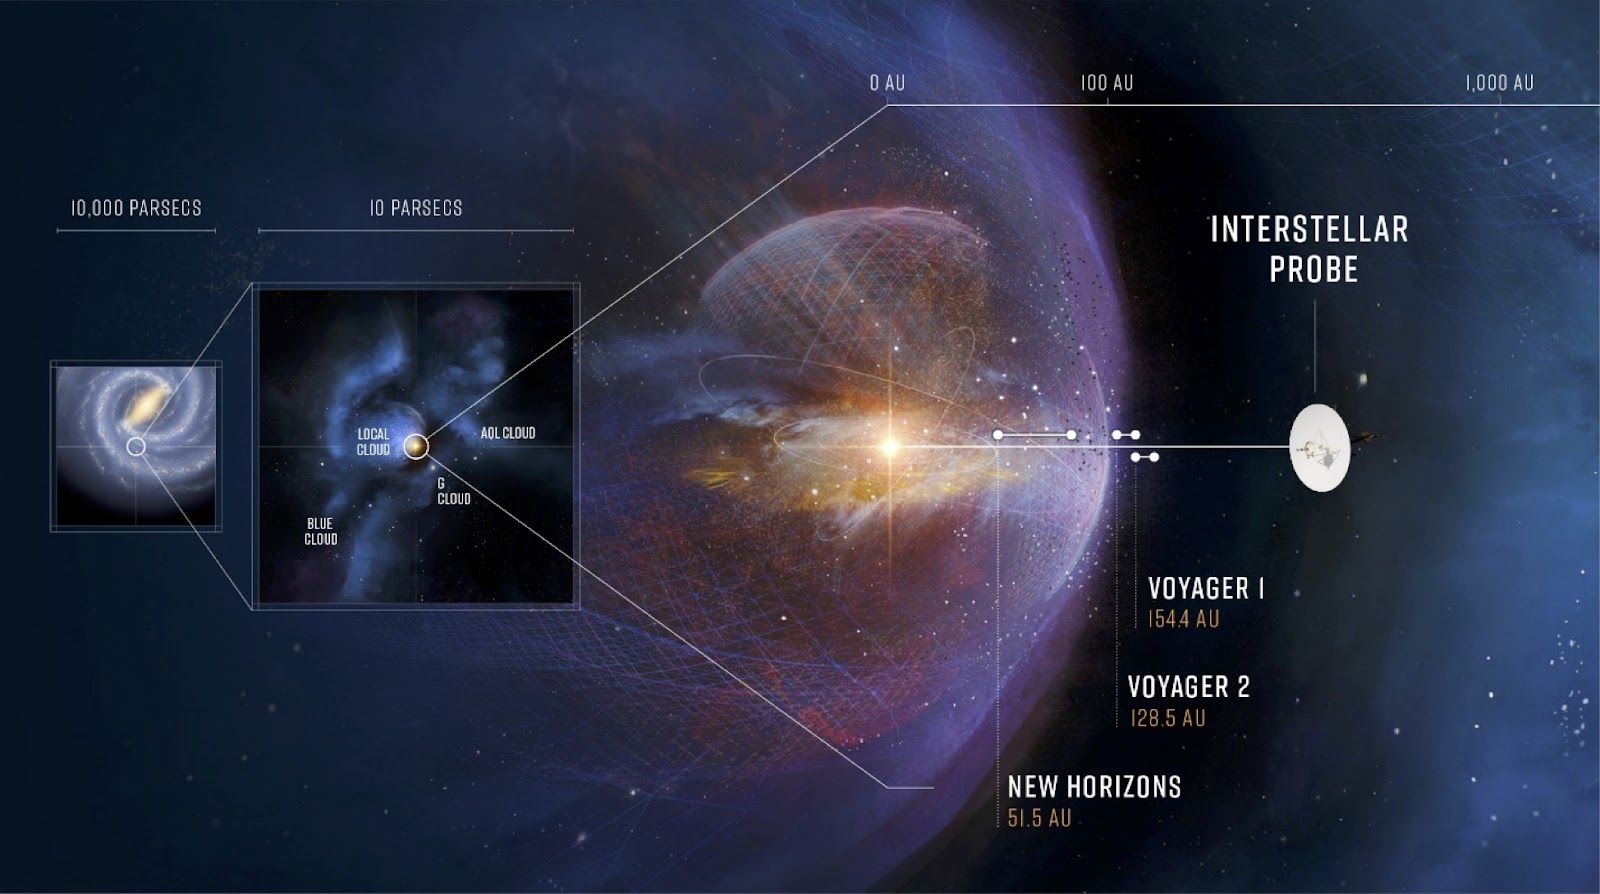 A graphic of the Sun’s position in the Milky Way Galaxy. A cutaway zooms into the Sun and its sphere of influence which borders the interstellar medium. A distance line in Astronomical Units (AU) places NASA’s current probes at 51.5 AU (New Horizons), 128.5 AU (Voyager 2), and 154.4 AU (Voyager 1) from the Sun. The future Interstellar Probe is placed at 400 AU, further than any probe has traveled